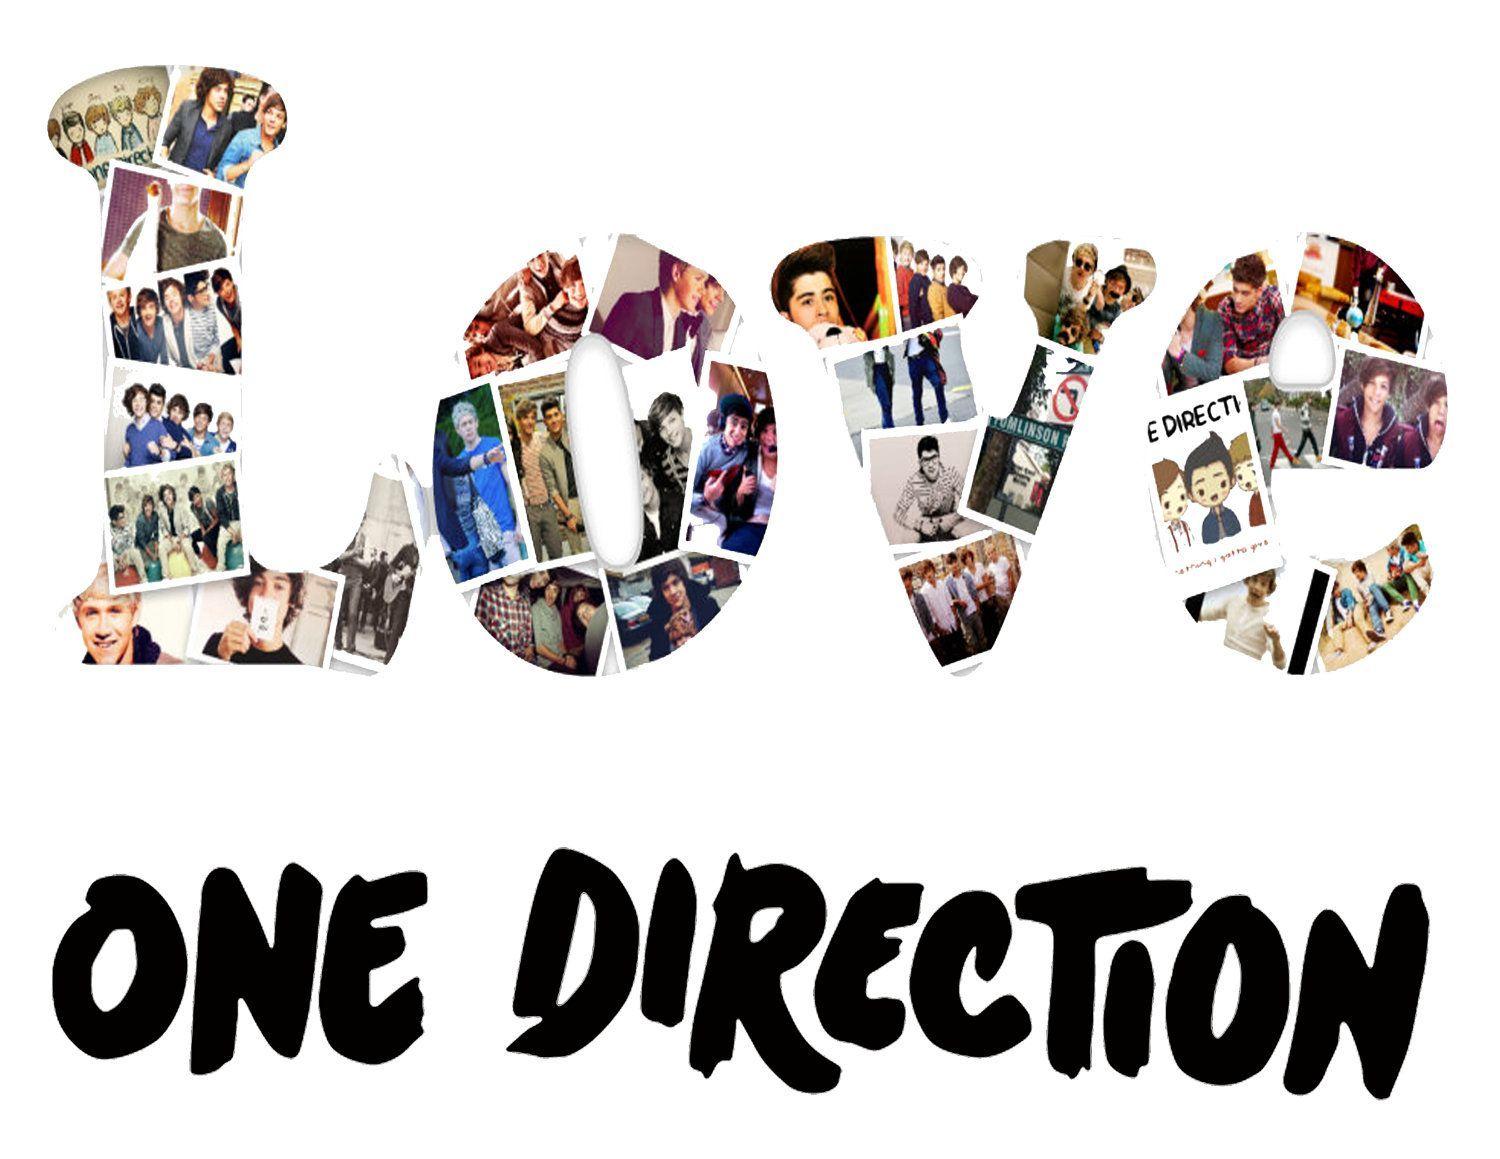 I Love One Direction Logo - one direction wallpaper tumblr. All About Logo: 1D Logo One